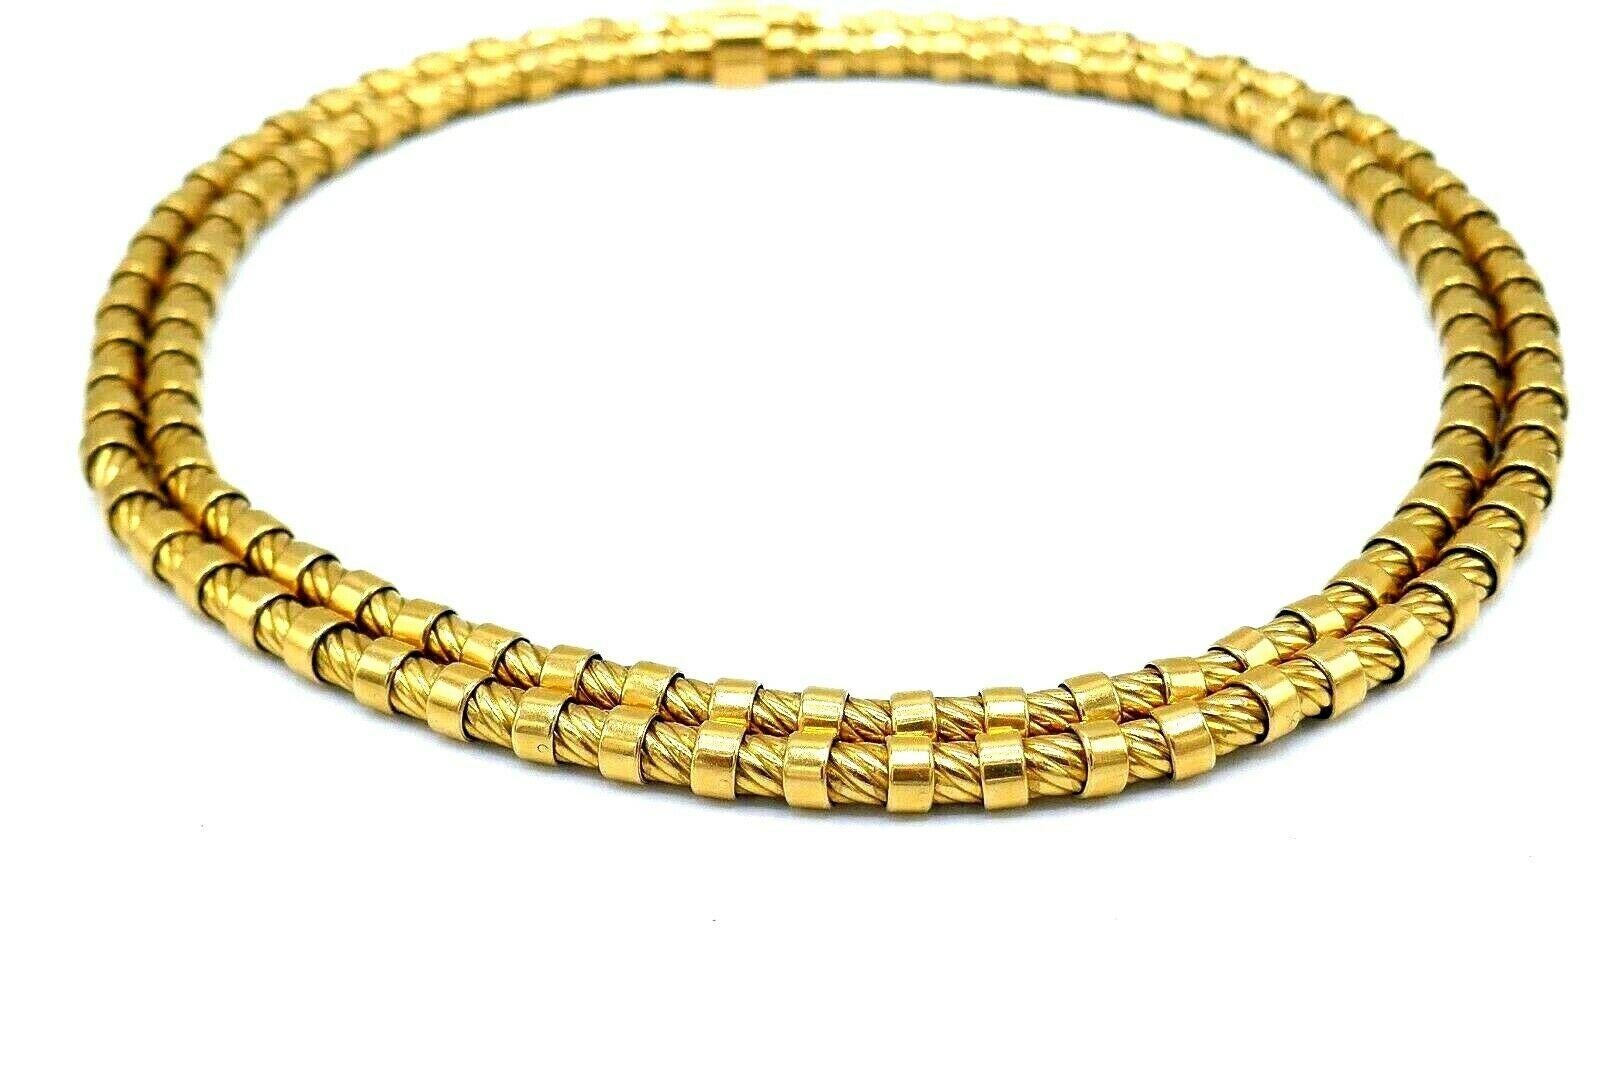 Chunky yet flexible rope chain necklace features two chains that are connected in the clasp area. Made of 18k yellow gold. Stamped with French and maker's marks.
Measurements: 16